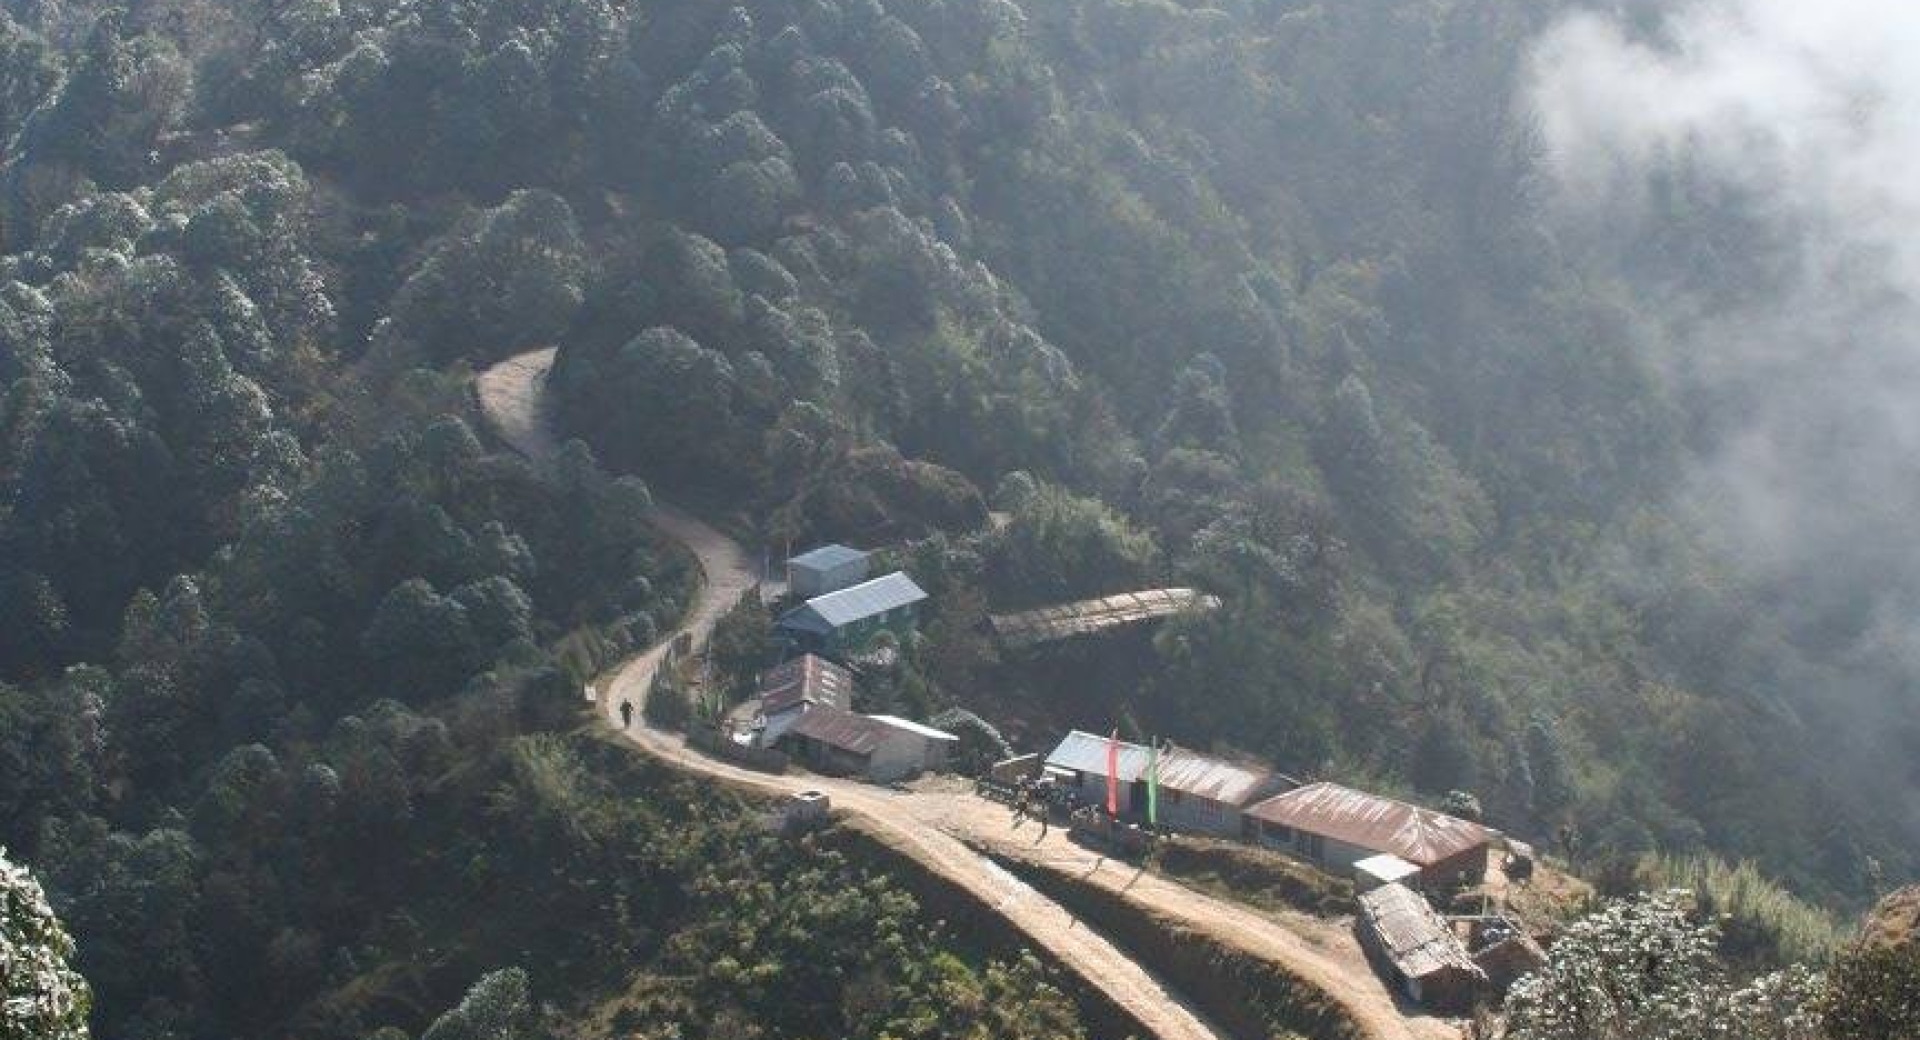 Conservation value of upper Mai valley forest in Panchthar-Ilam-Taplejung (PIT) corridor of Eastern Nepal for birds